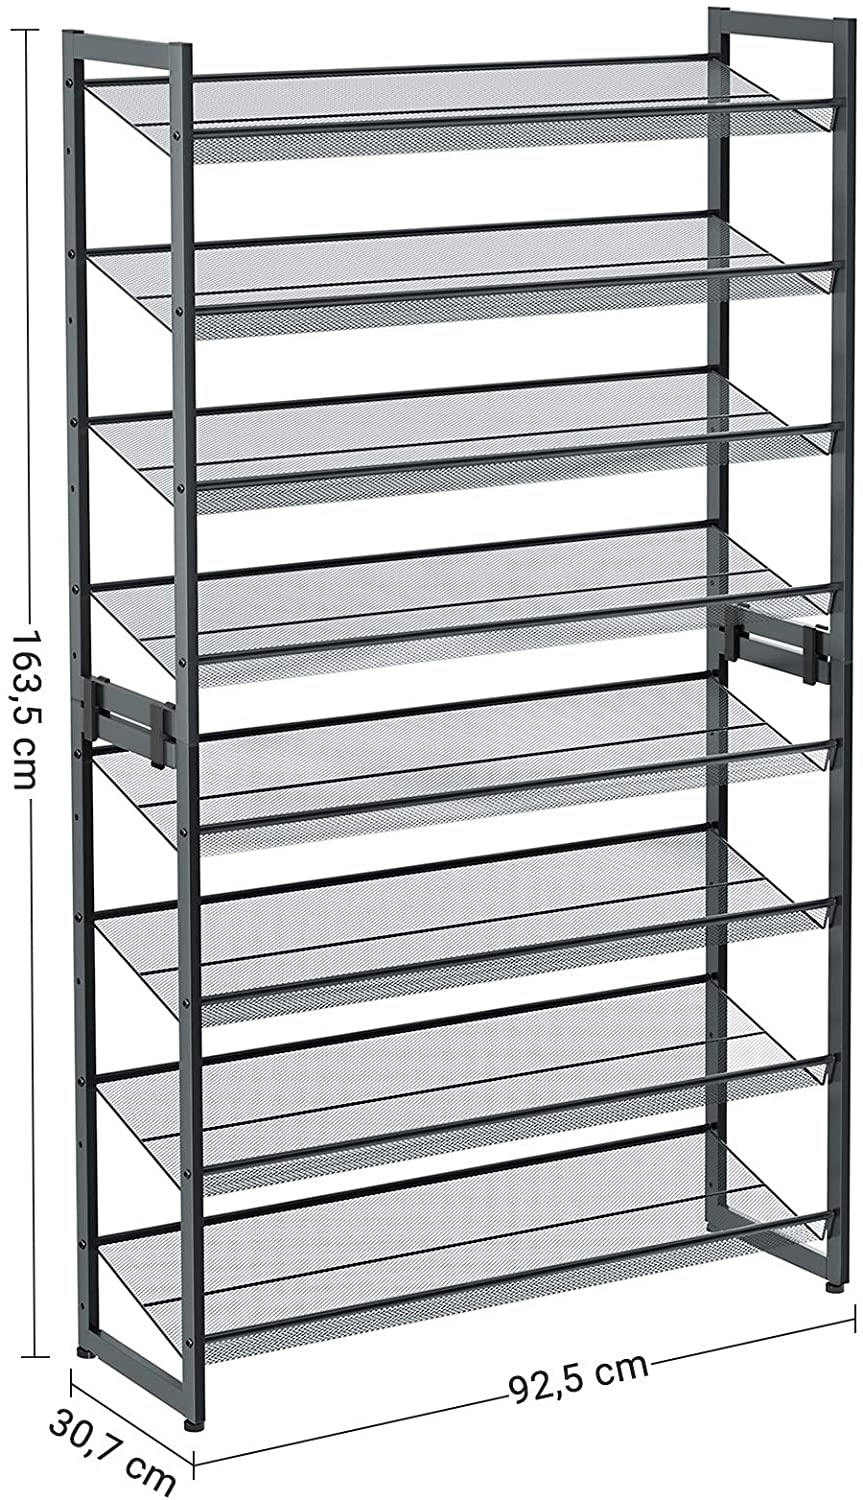 8-Tier Shoe Rack, Set of 2 Stackable 4-Tier Shoe Organisers for 32 to 40 Pairs of Shoes, Adjustable Flat or Angled Shelves, Cool Grey LMR08GB RAW58.dk 